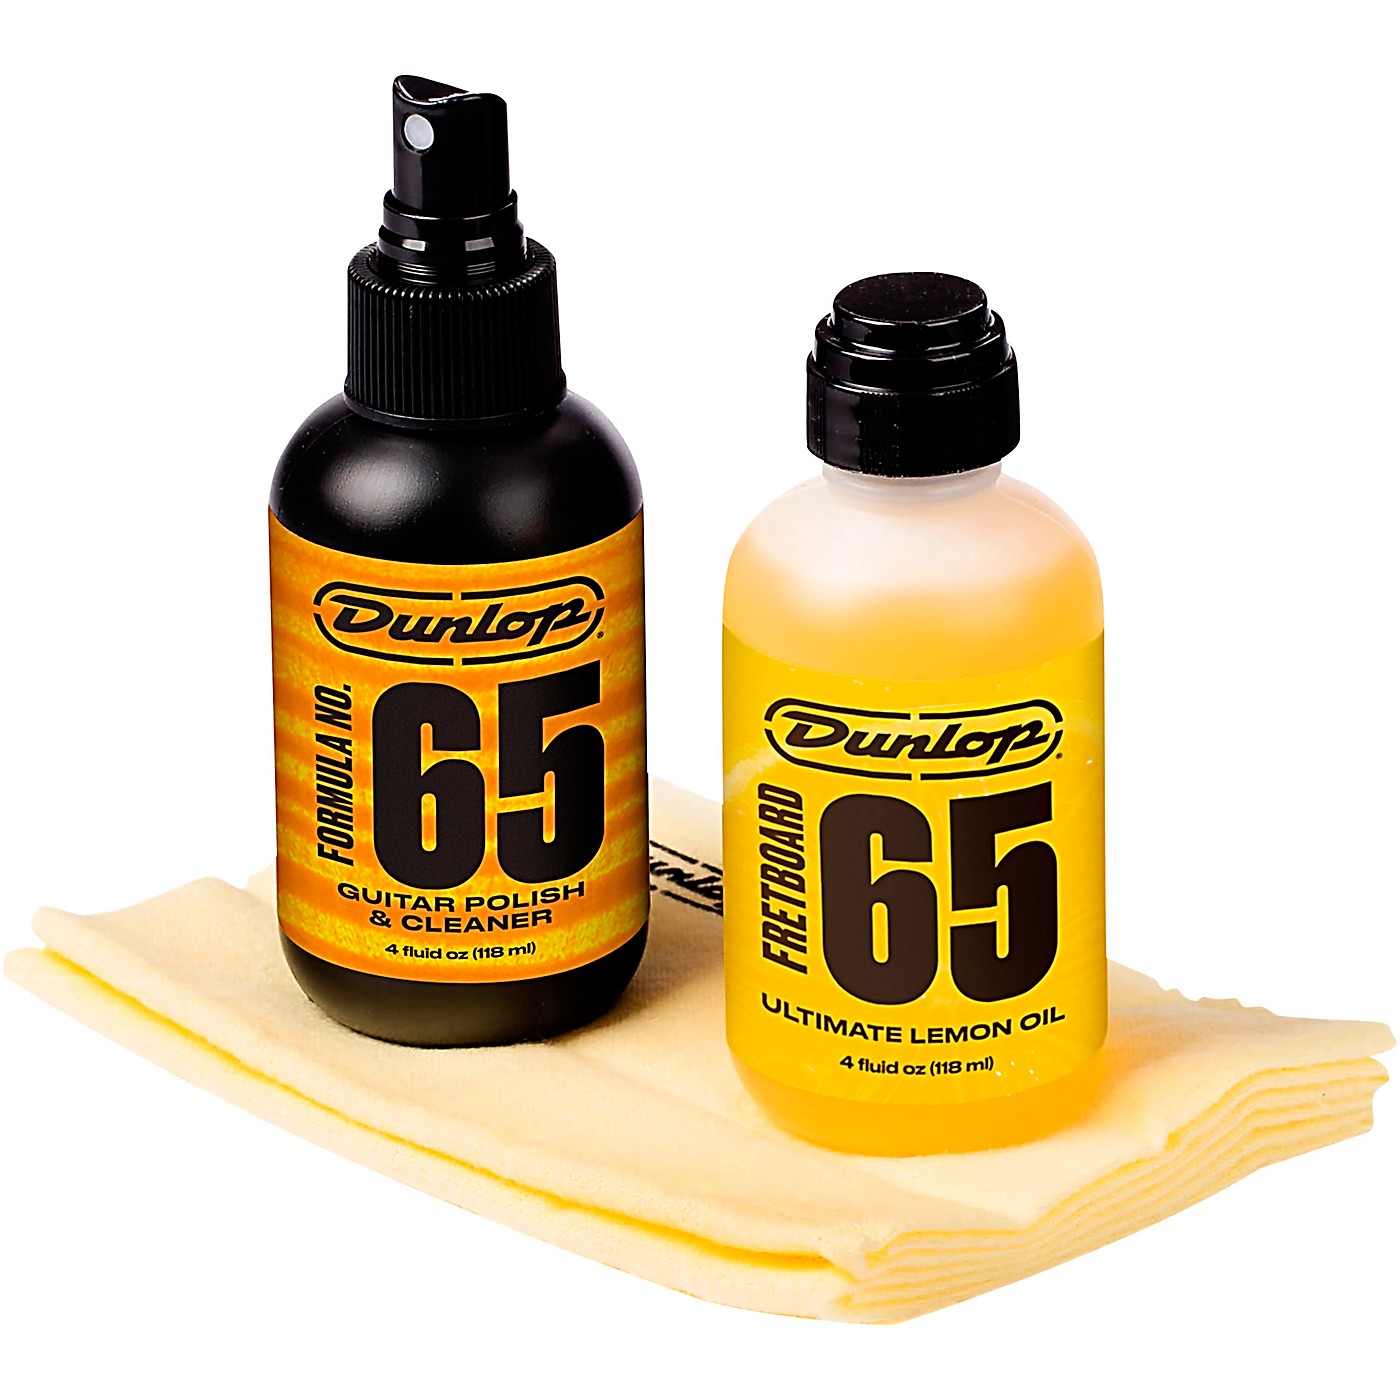 Dunlop Body and Fingerboard Cleaning Kit thumbnail